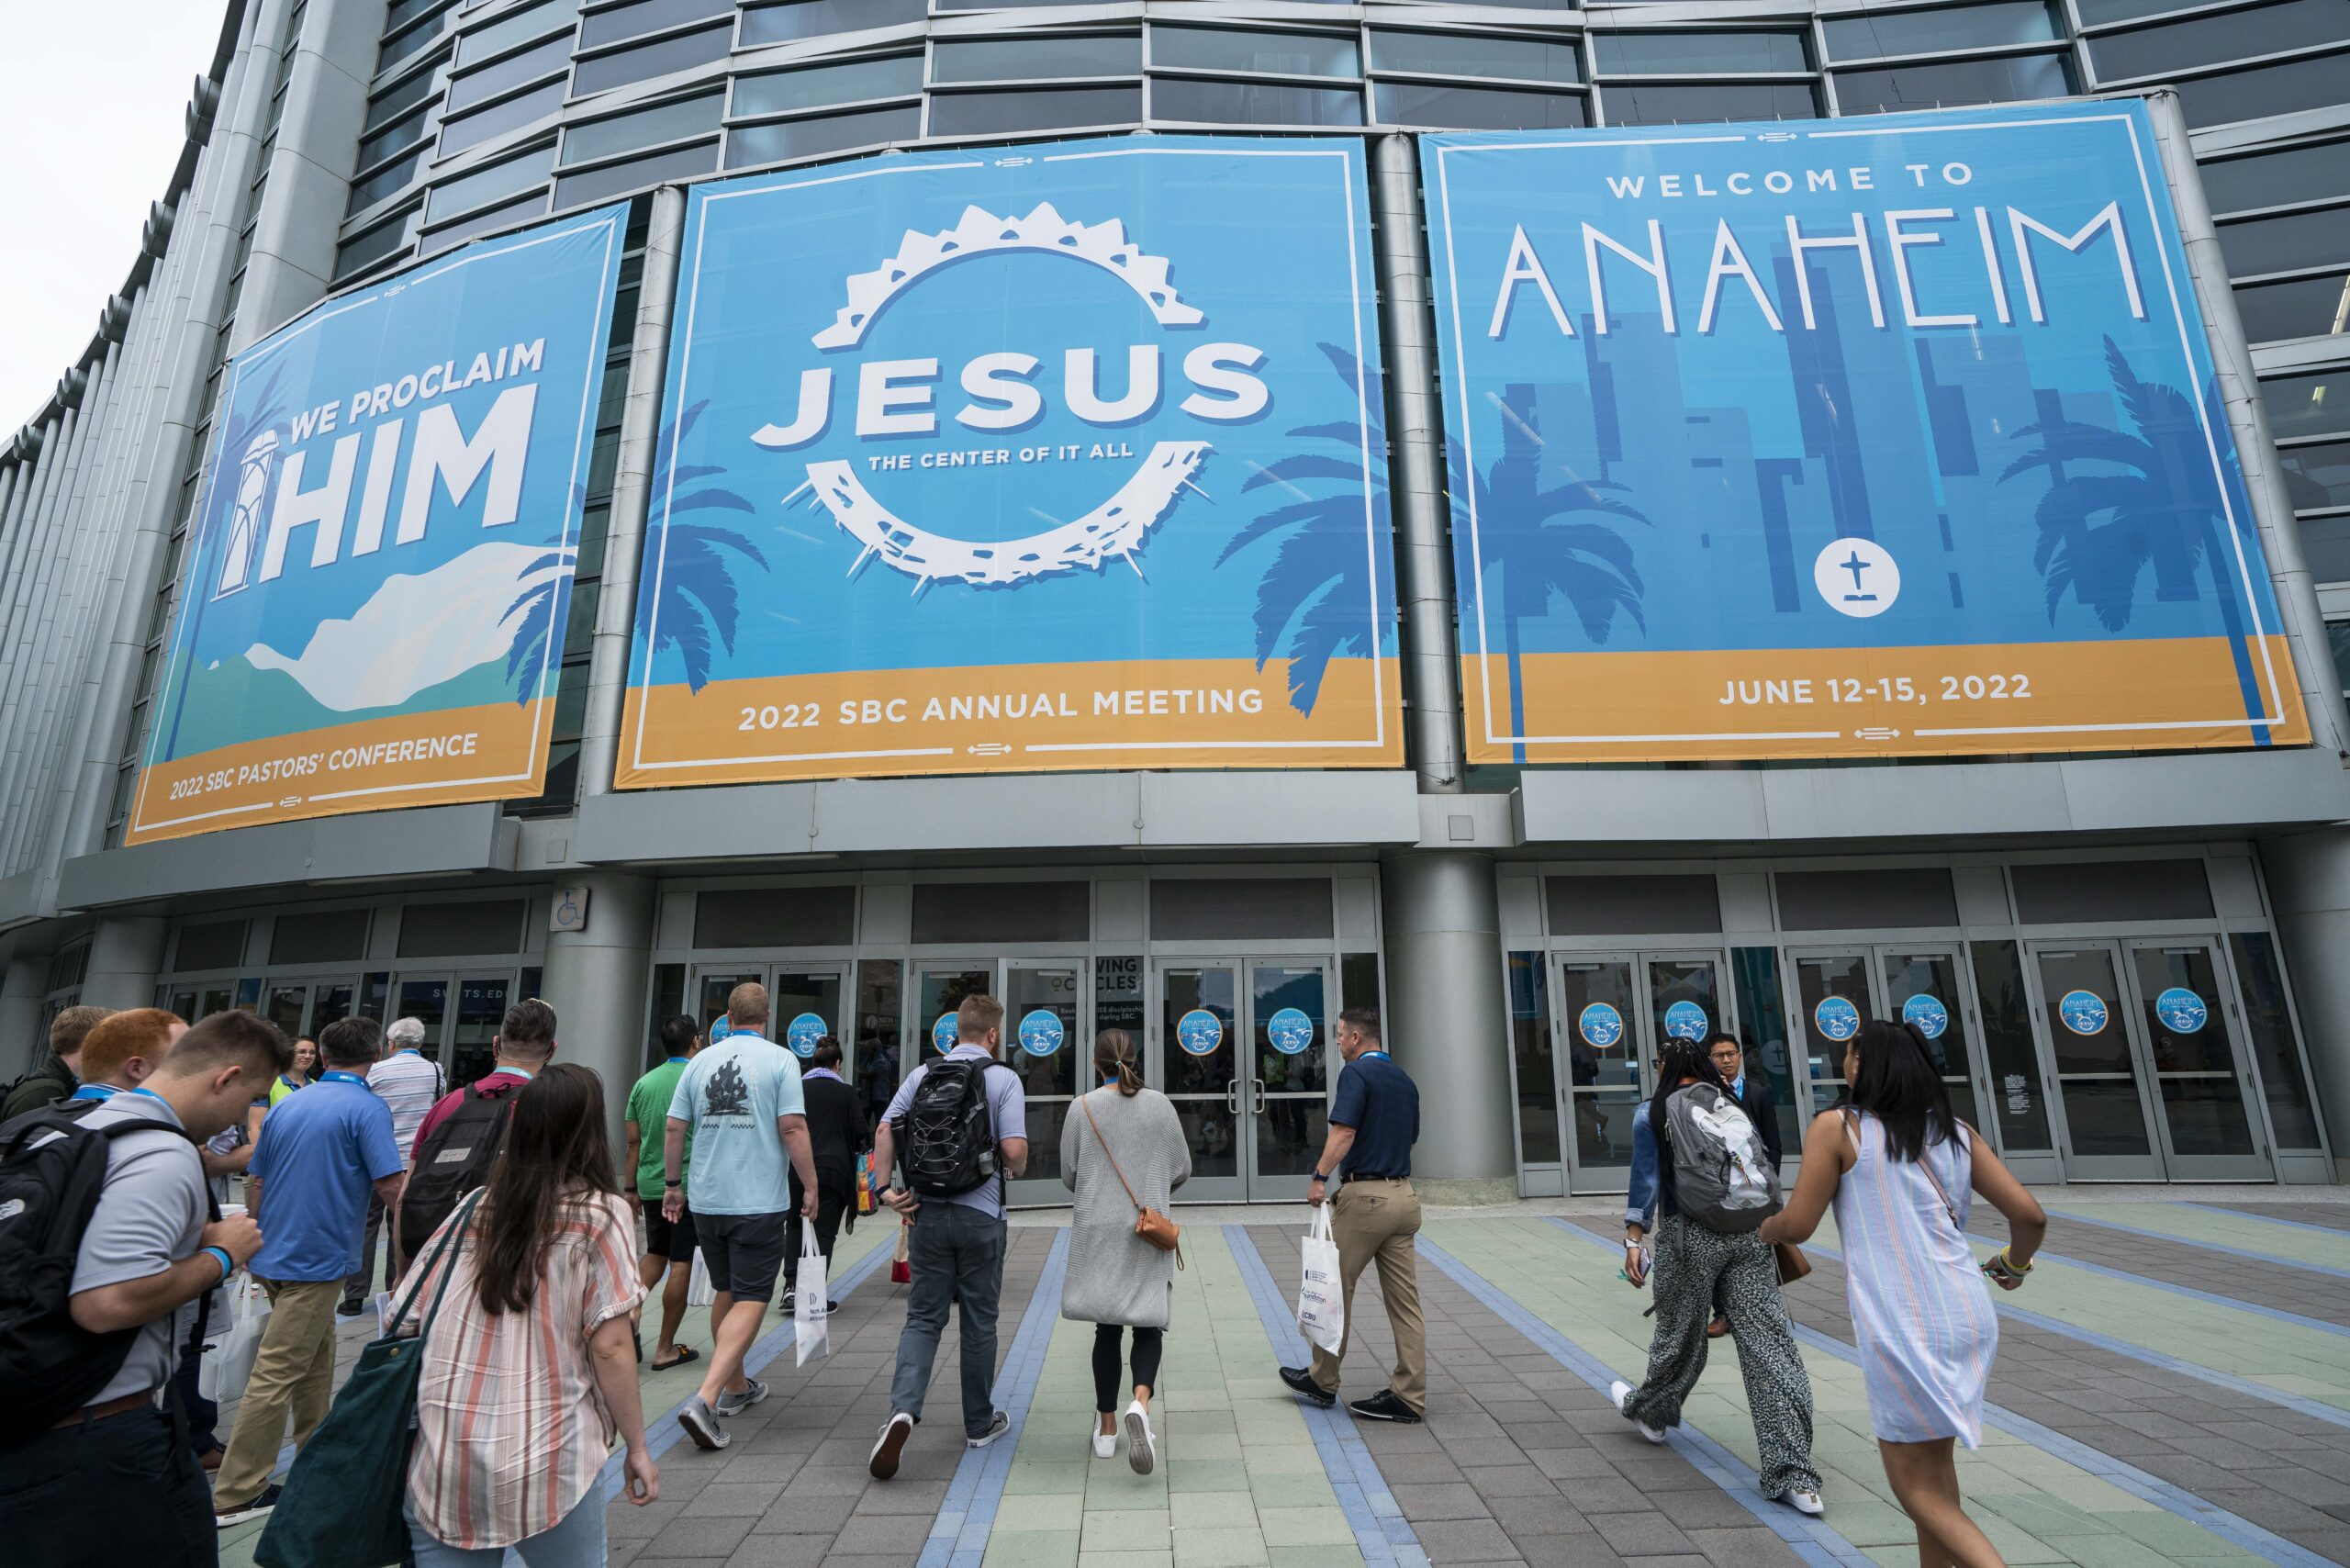 People enter the Southern Baptist Convention annual meeting held at the Anaheim Convention Center in Anaheim, California, on Tuesday, June 14, 2022. Photo by Justin L. Stewart/Religion News Service